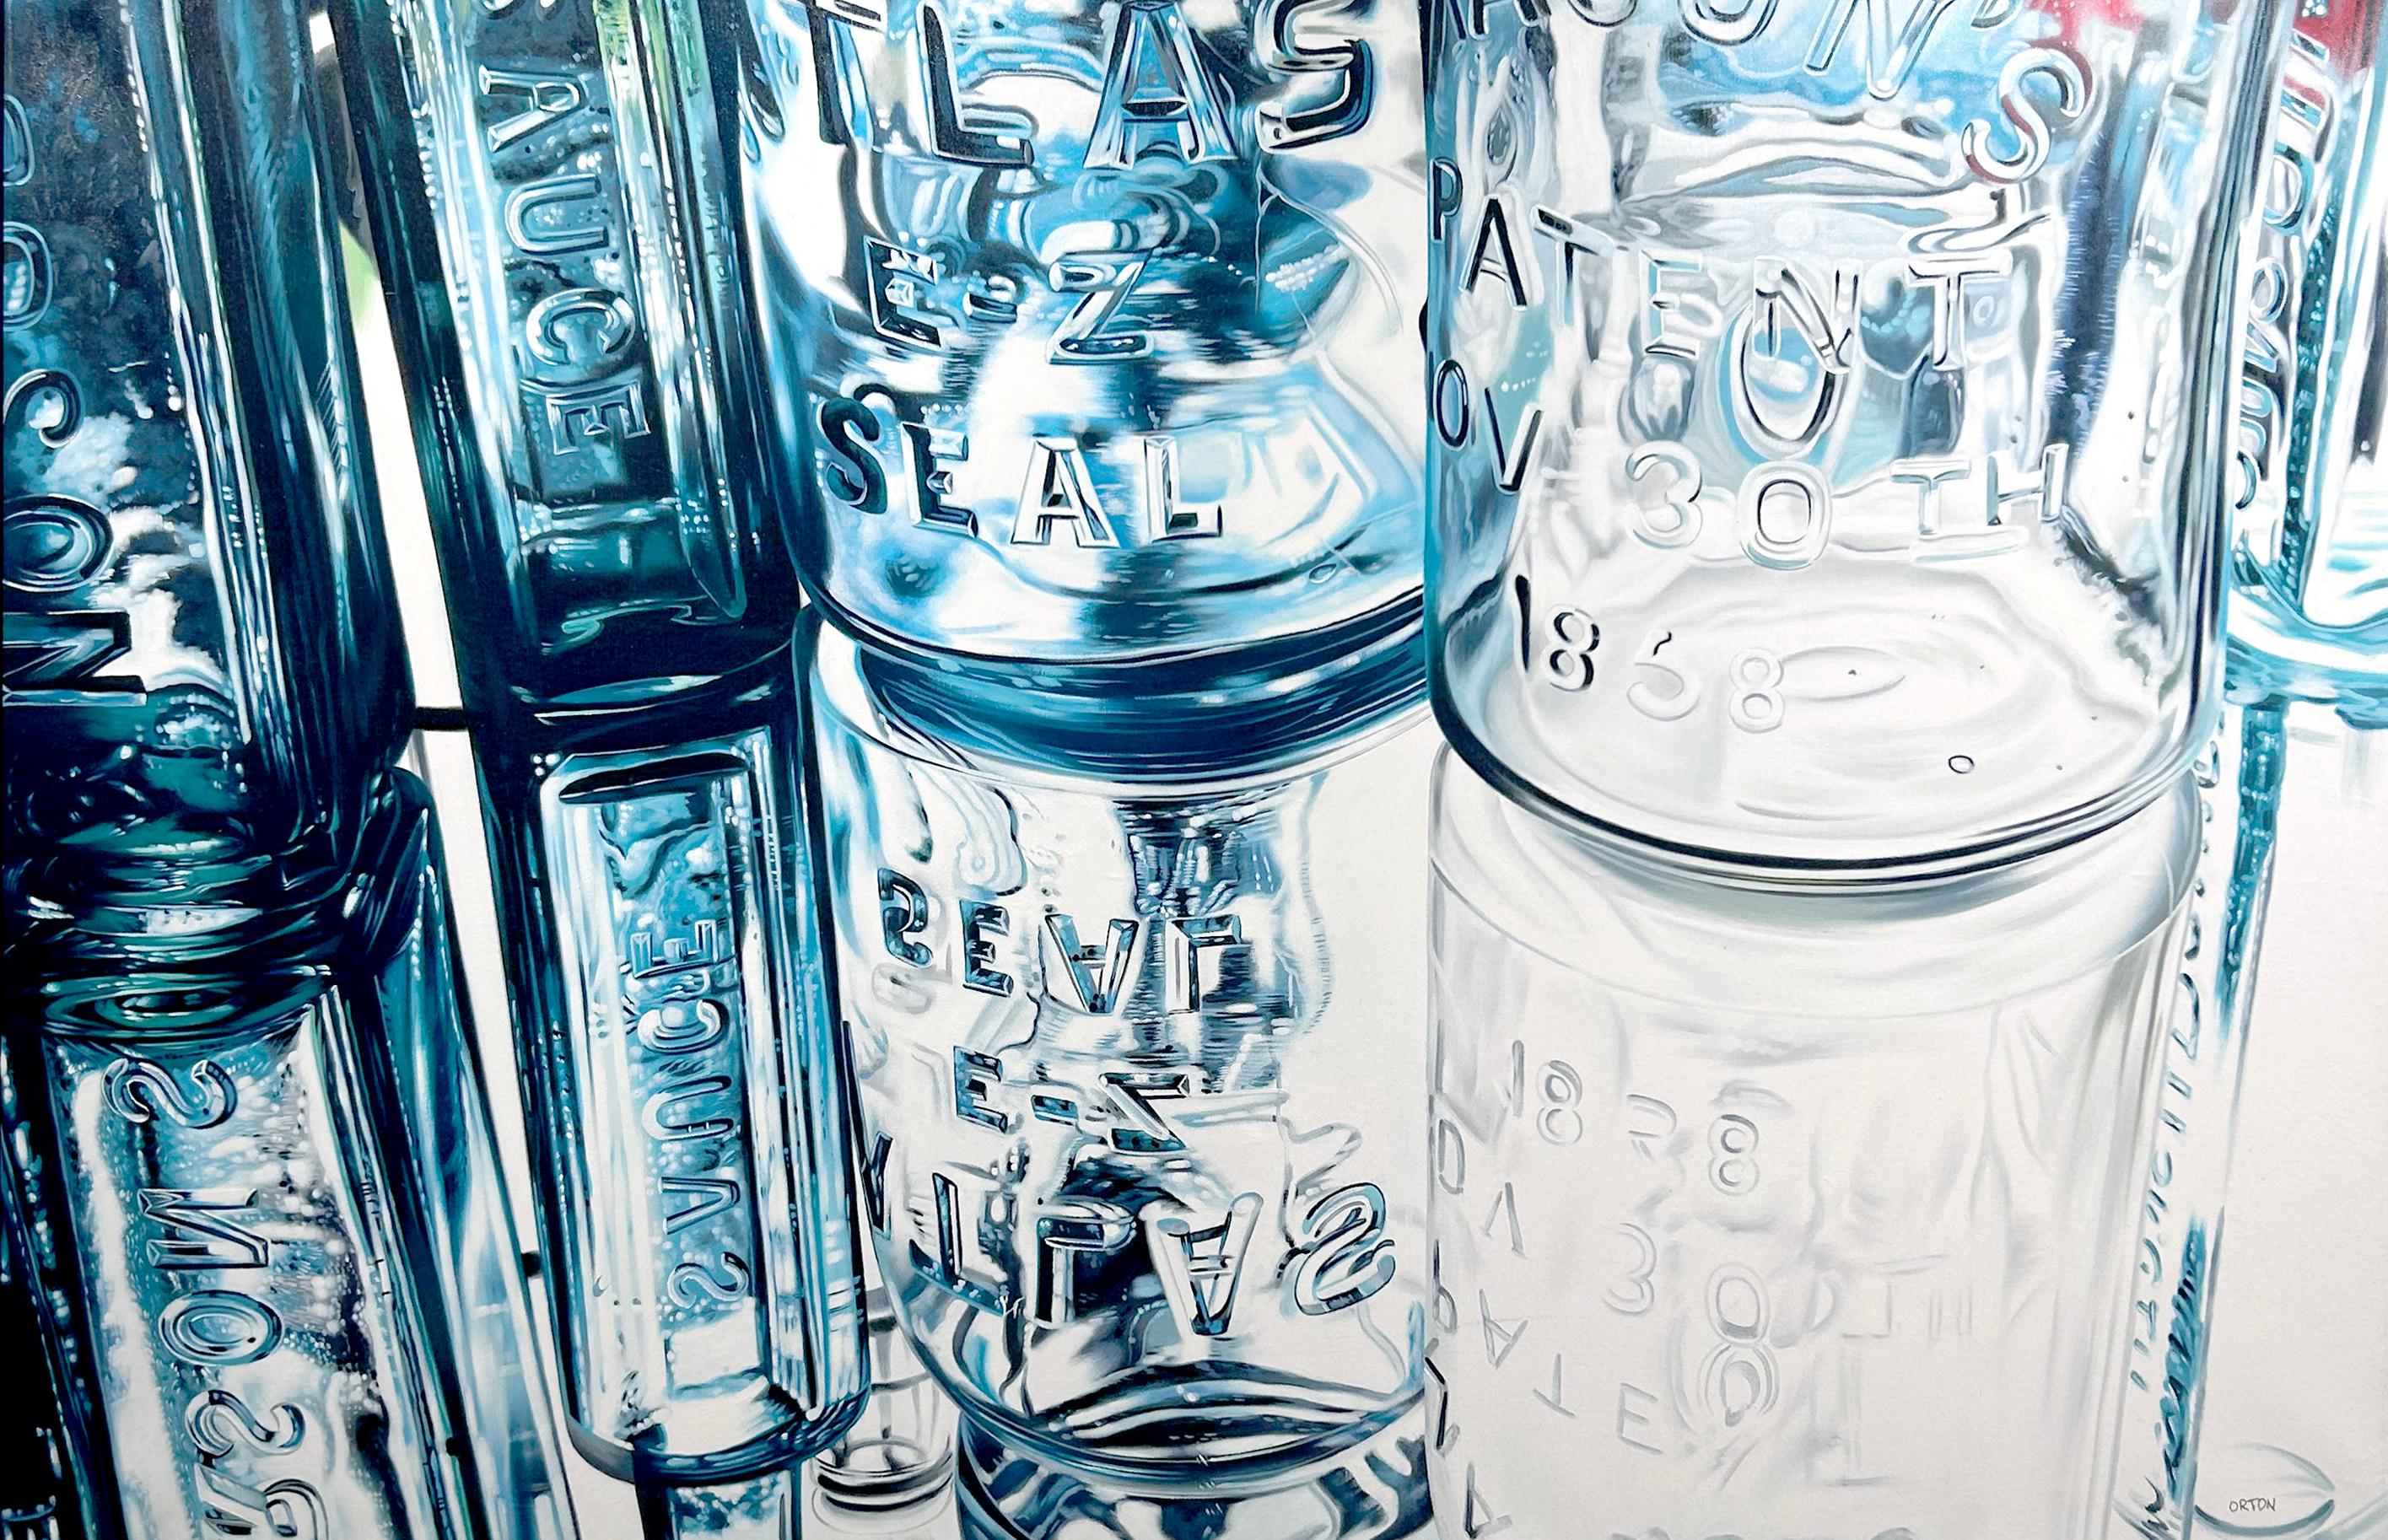 Ken Orton's "Rose Blossom" is a 36x54 original oil painting on canvas. This painting depicts a still life setting featuring an up-close cropping of an assortment of glass bottles and jars. Soft and subtle tones of blue bend, reflect and refract